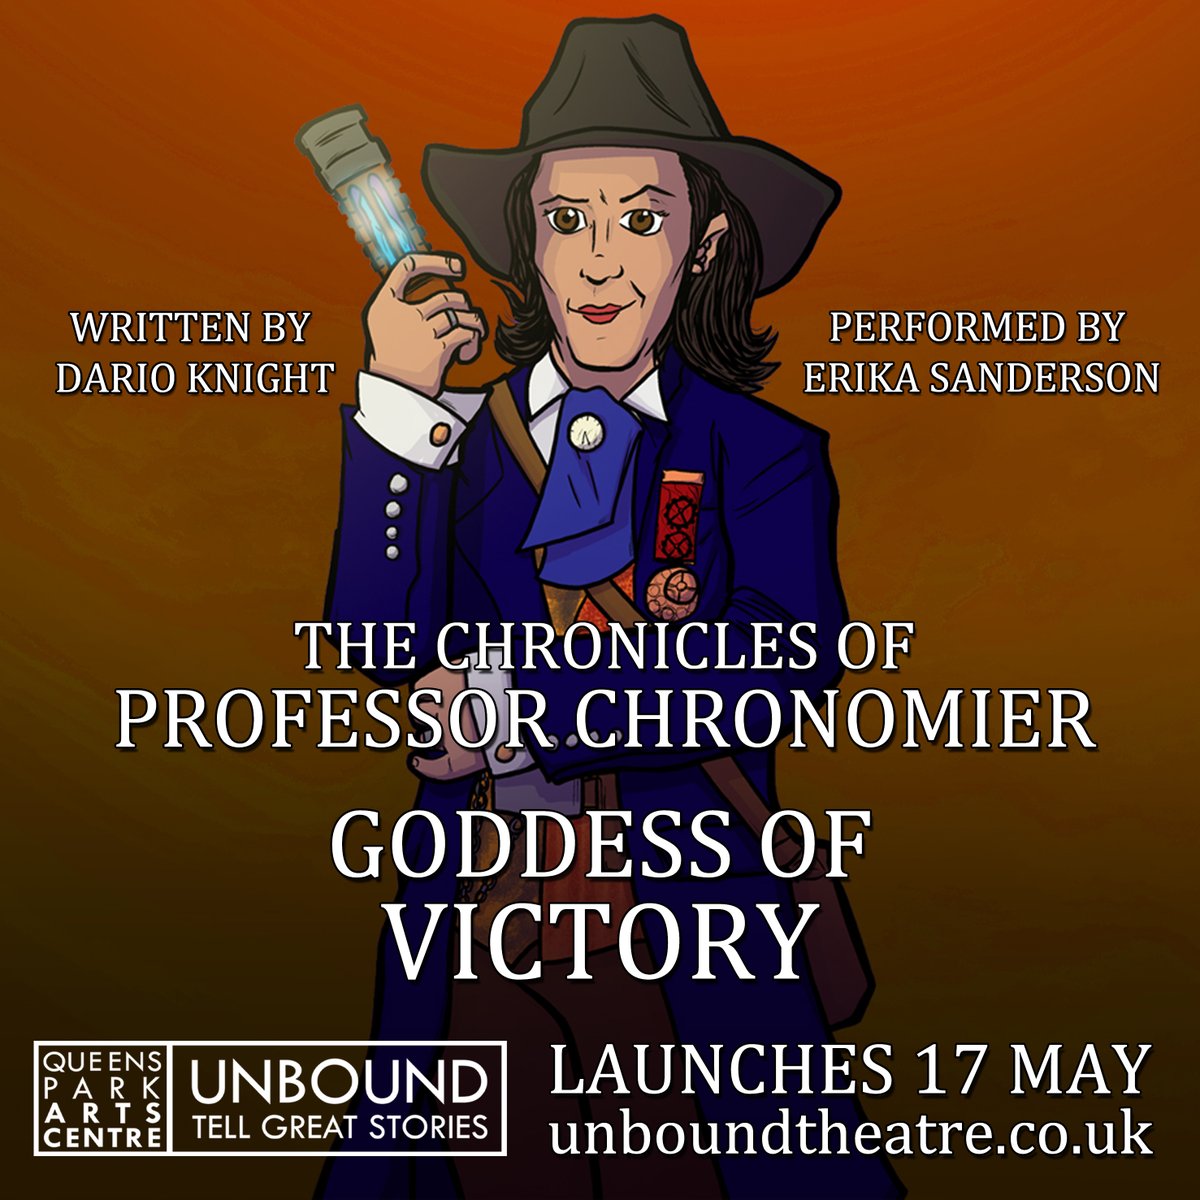 Professor Chronomier's latest audio adventure begins today! ⏳ Performed by @ErikaSanderson and written by @DarioKnight90, the prologue of #GoddessOfVictory is available to stream and download for free at soundcloud.com/unboundtheatre…